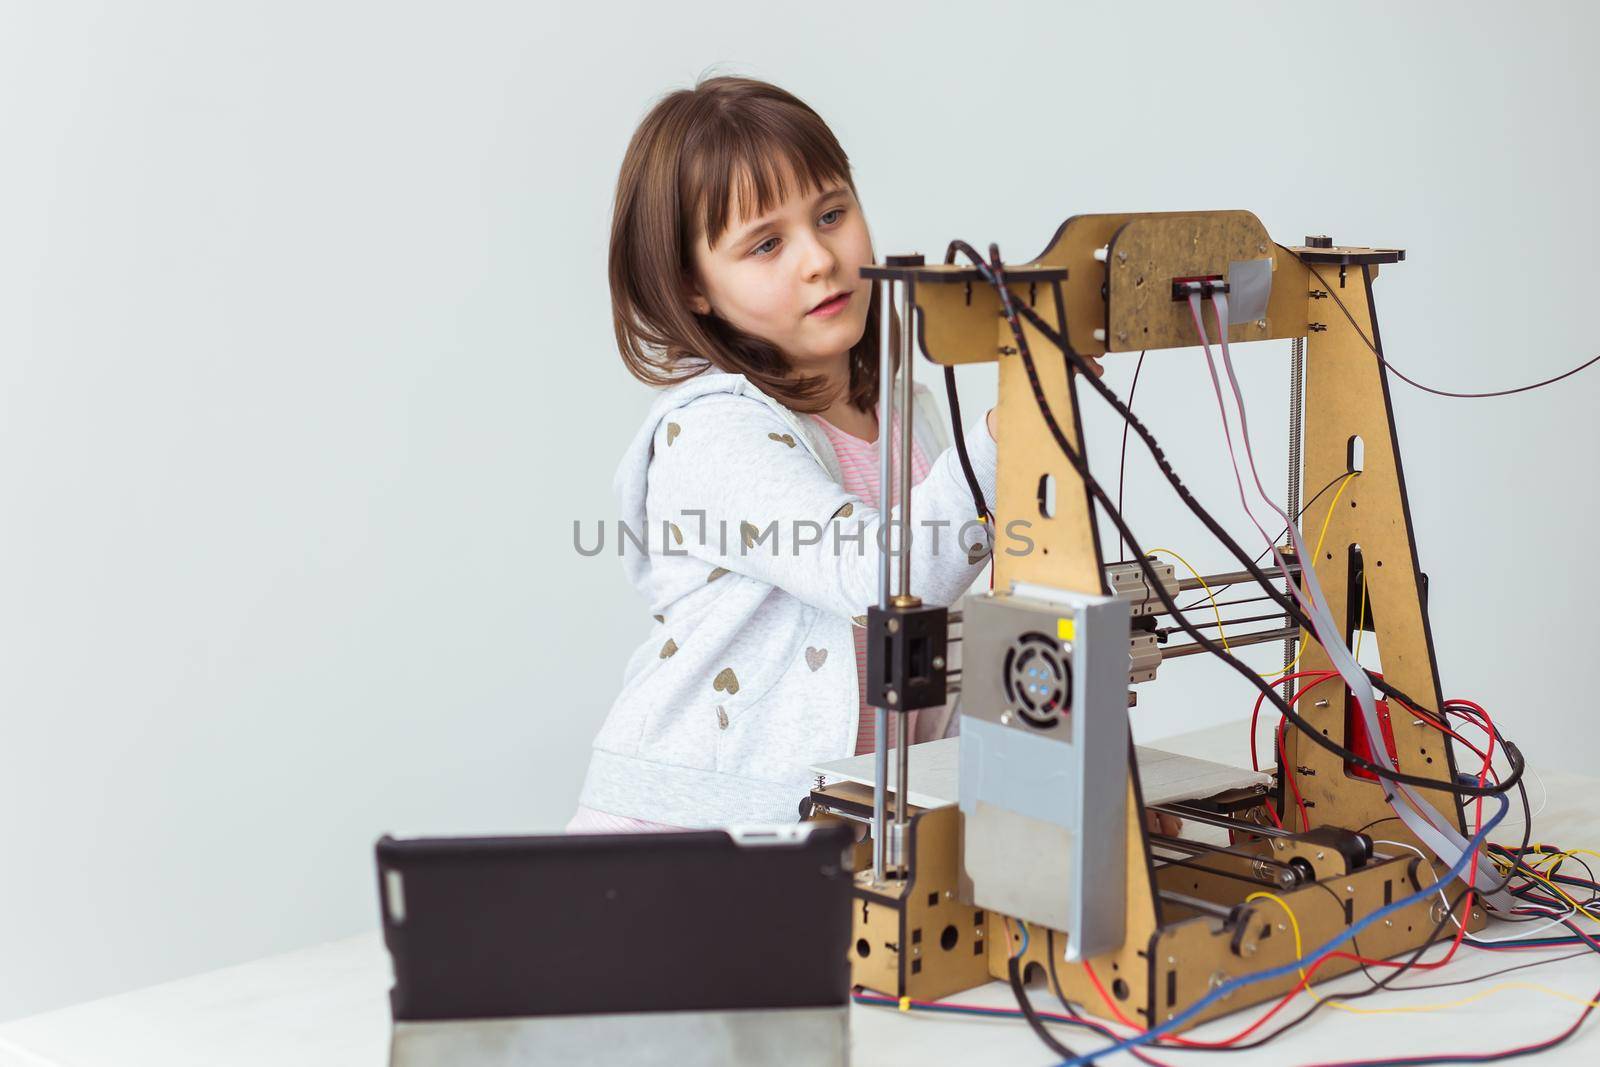 Child student makes the item on the 3D printer. School, technologies and science.